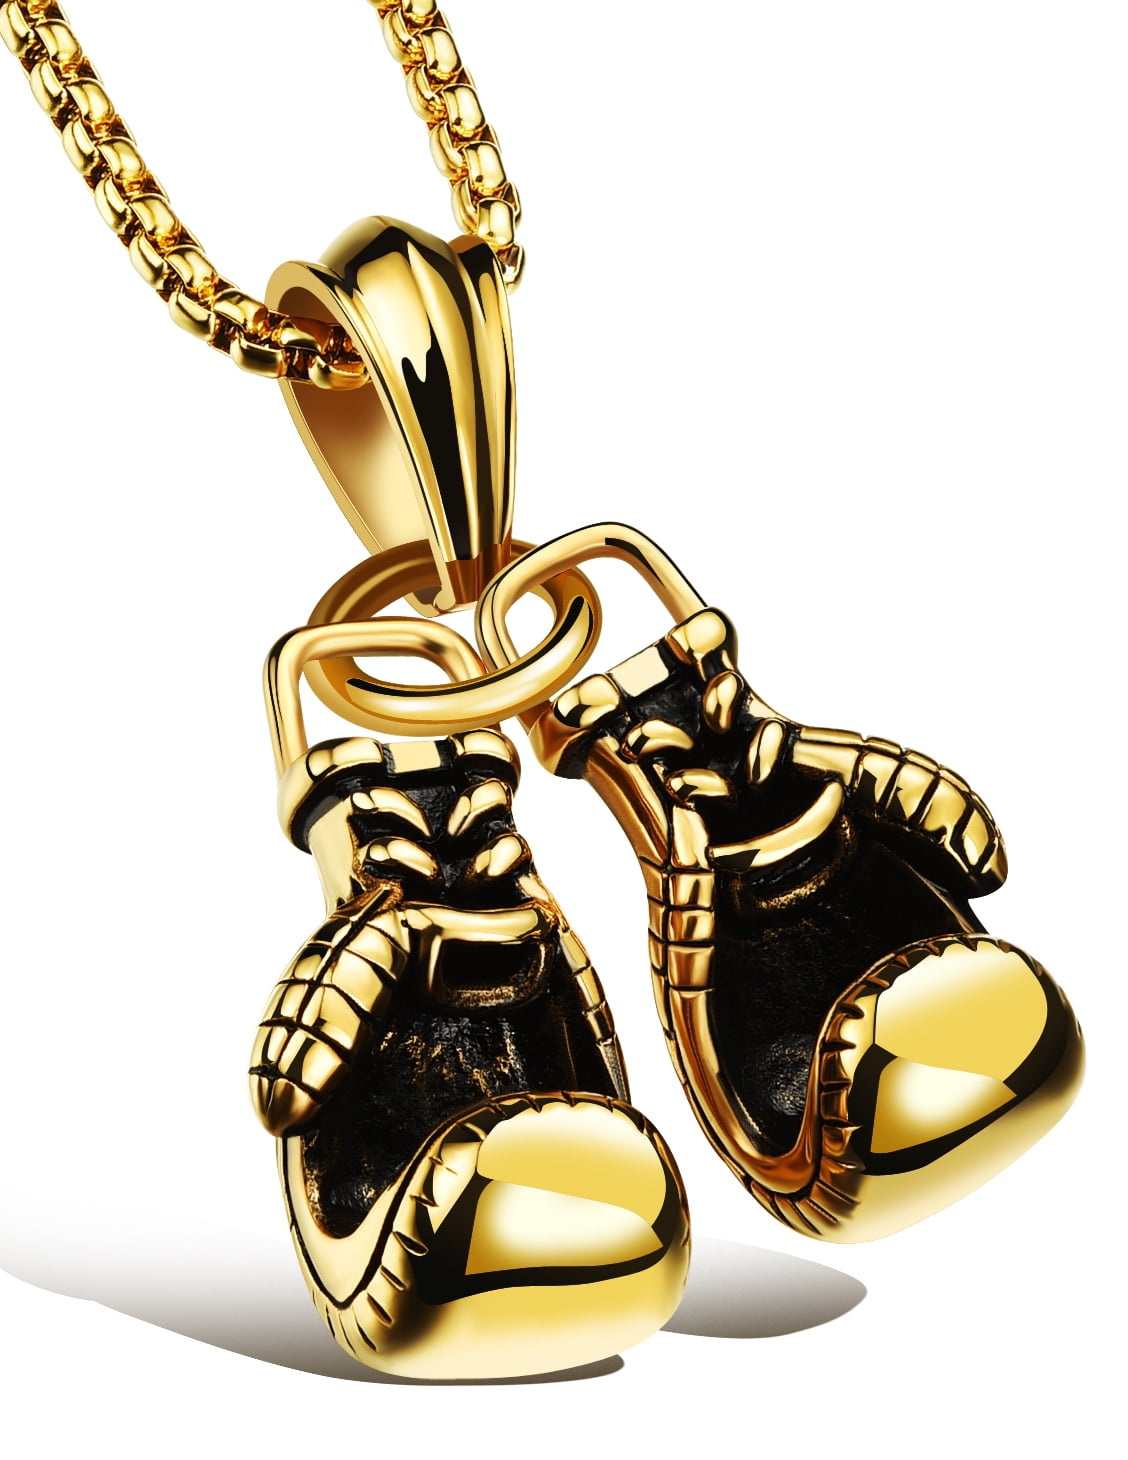 Details about   MEN Stainless Steel Black/Silver 3D Boxing Glove Cross Charm Pendant*P75 